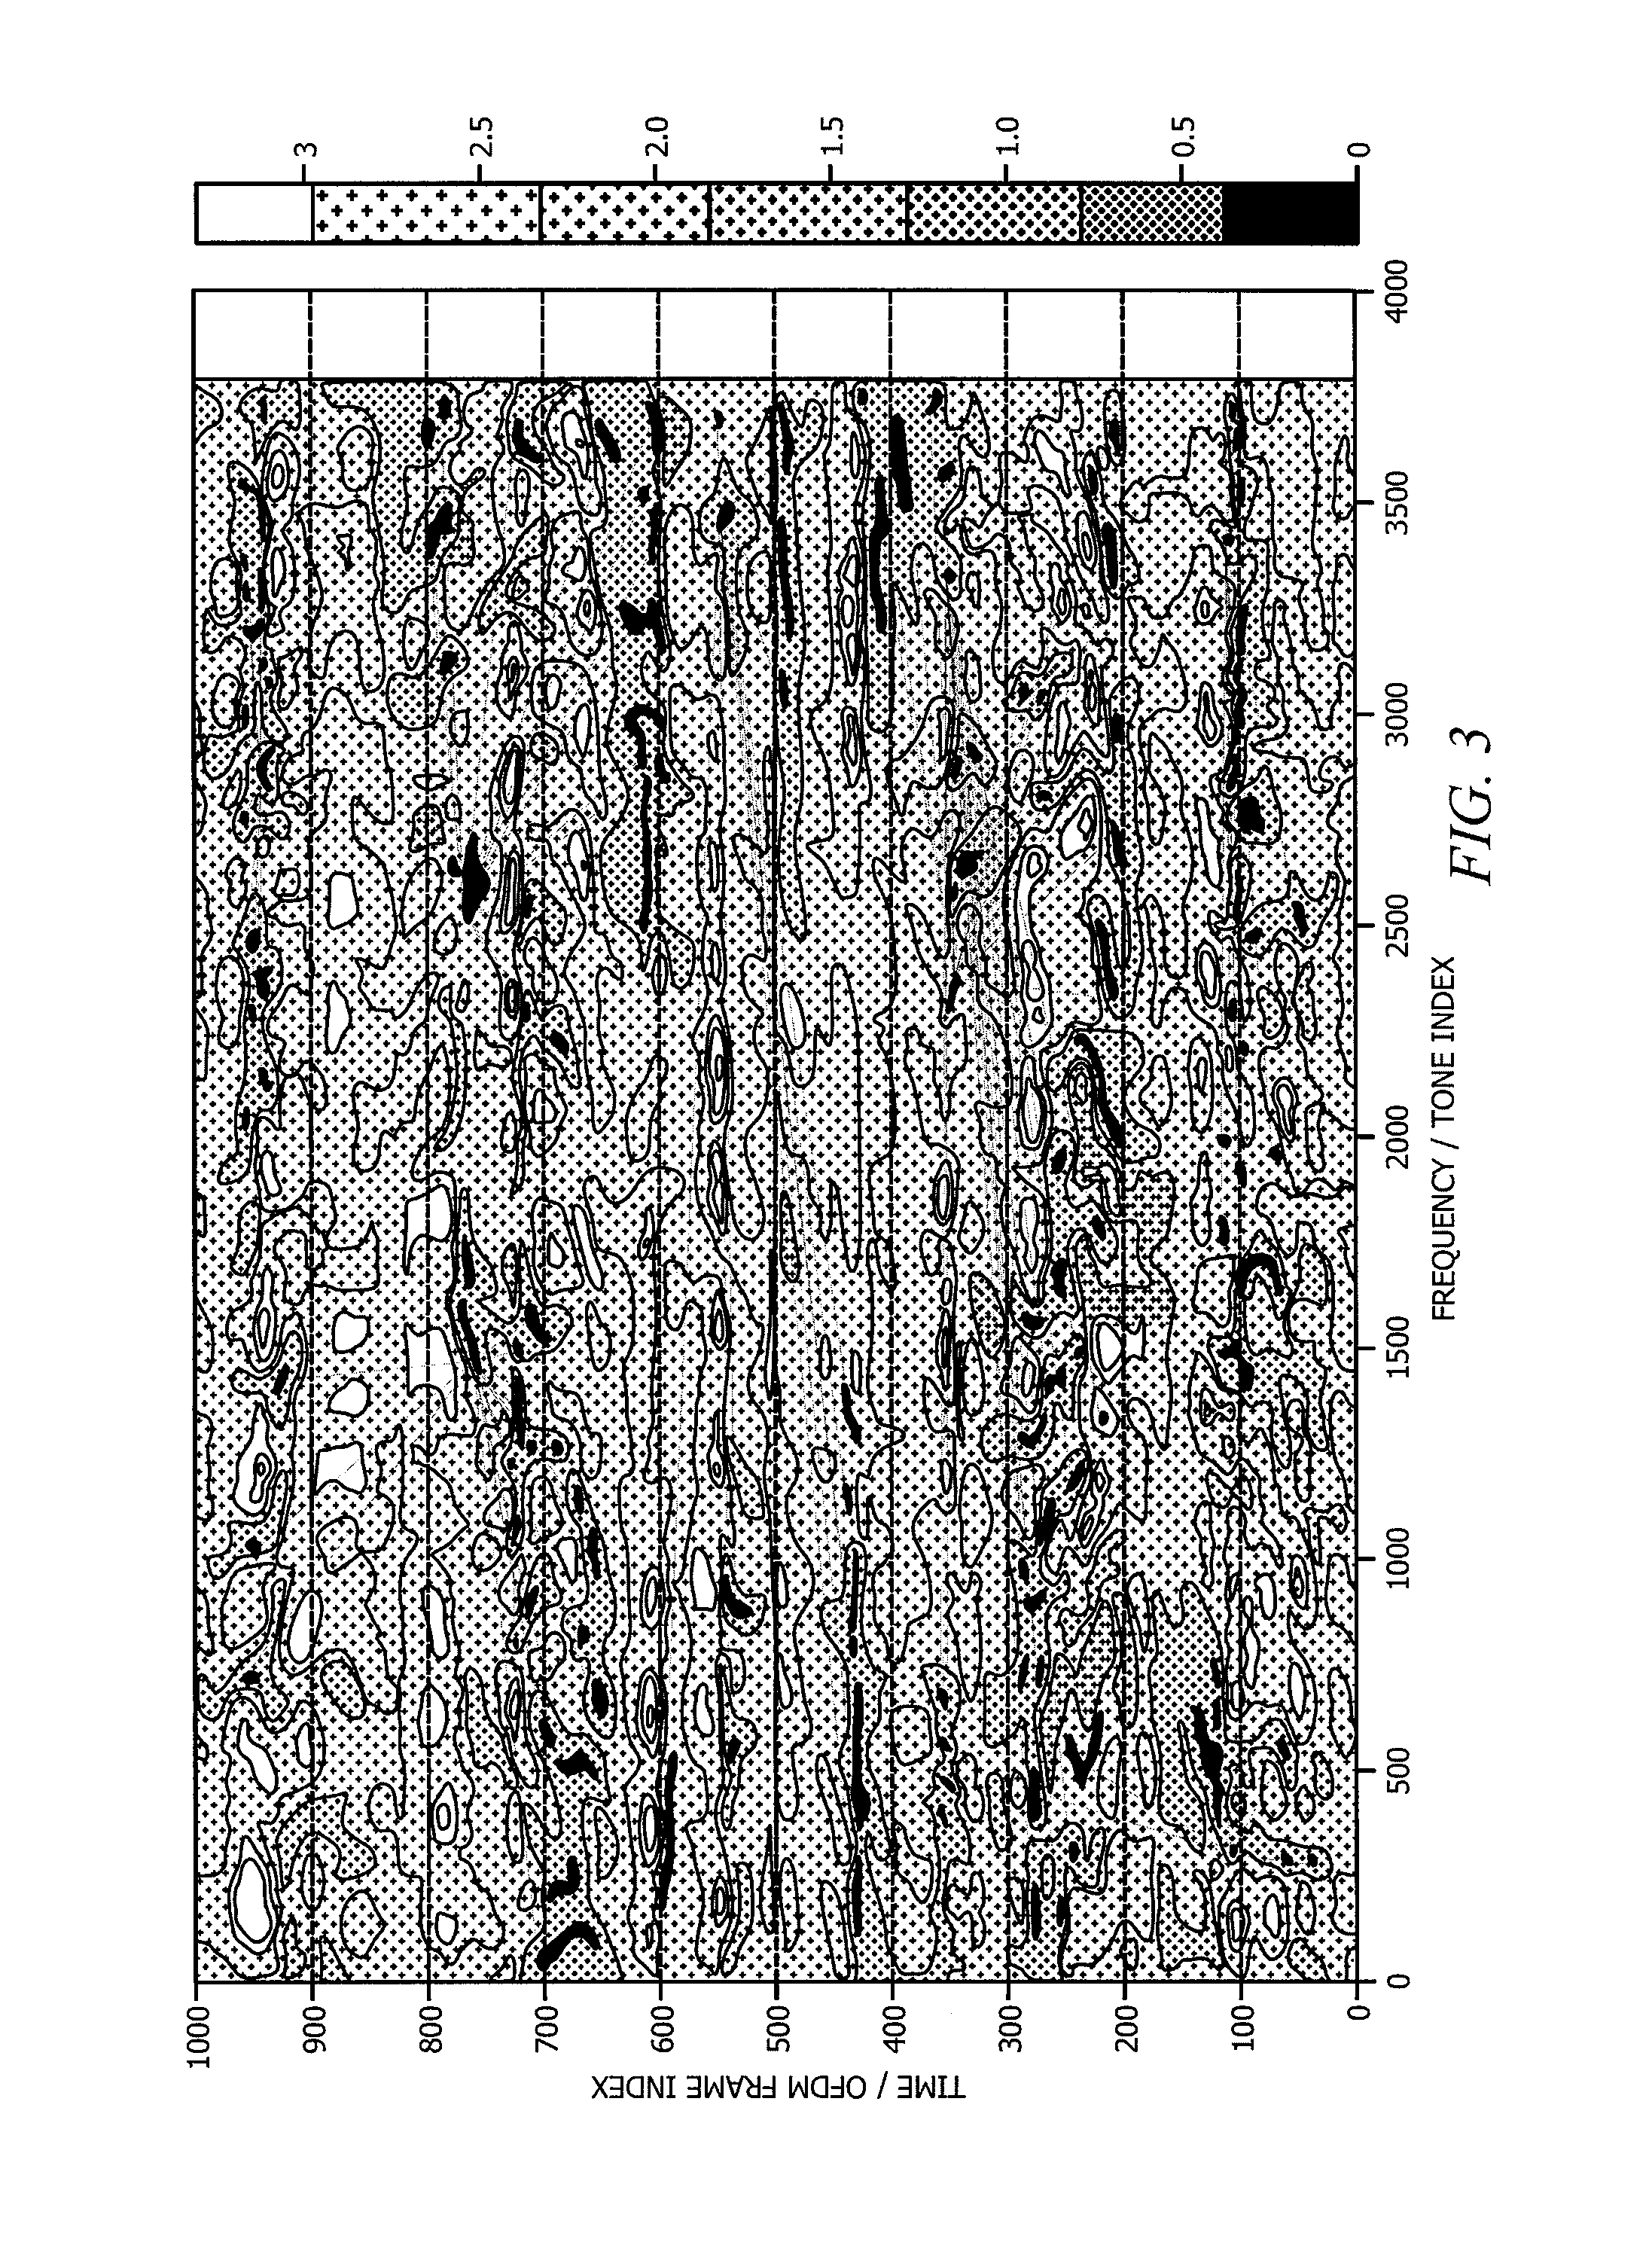 Systems and methods for intra communication system information transfer